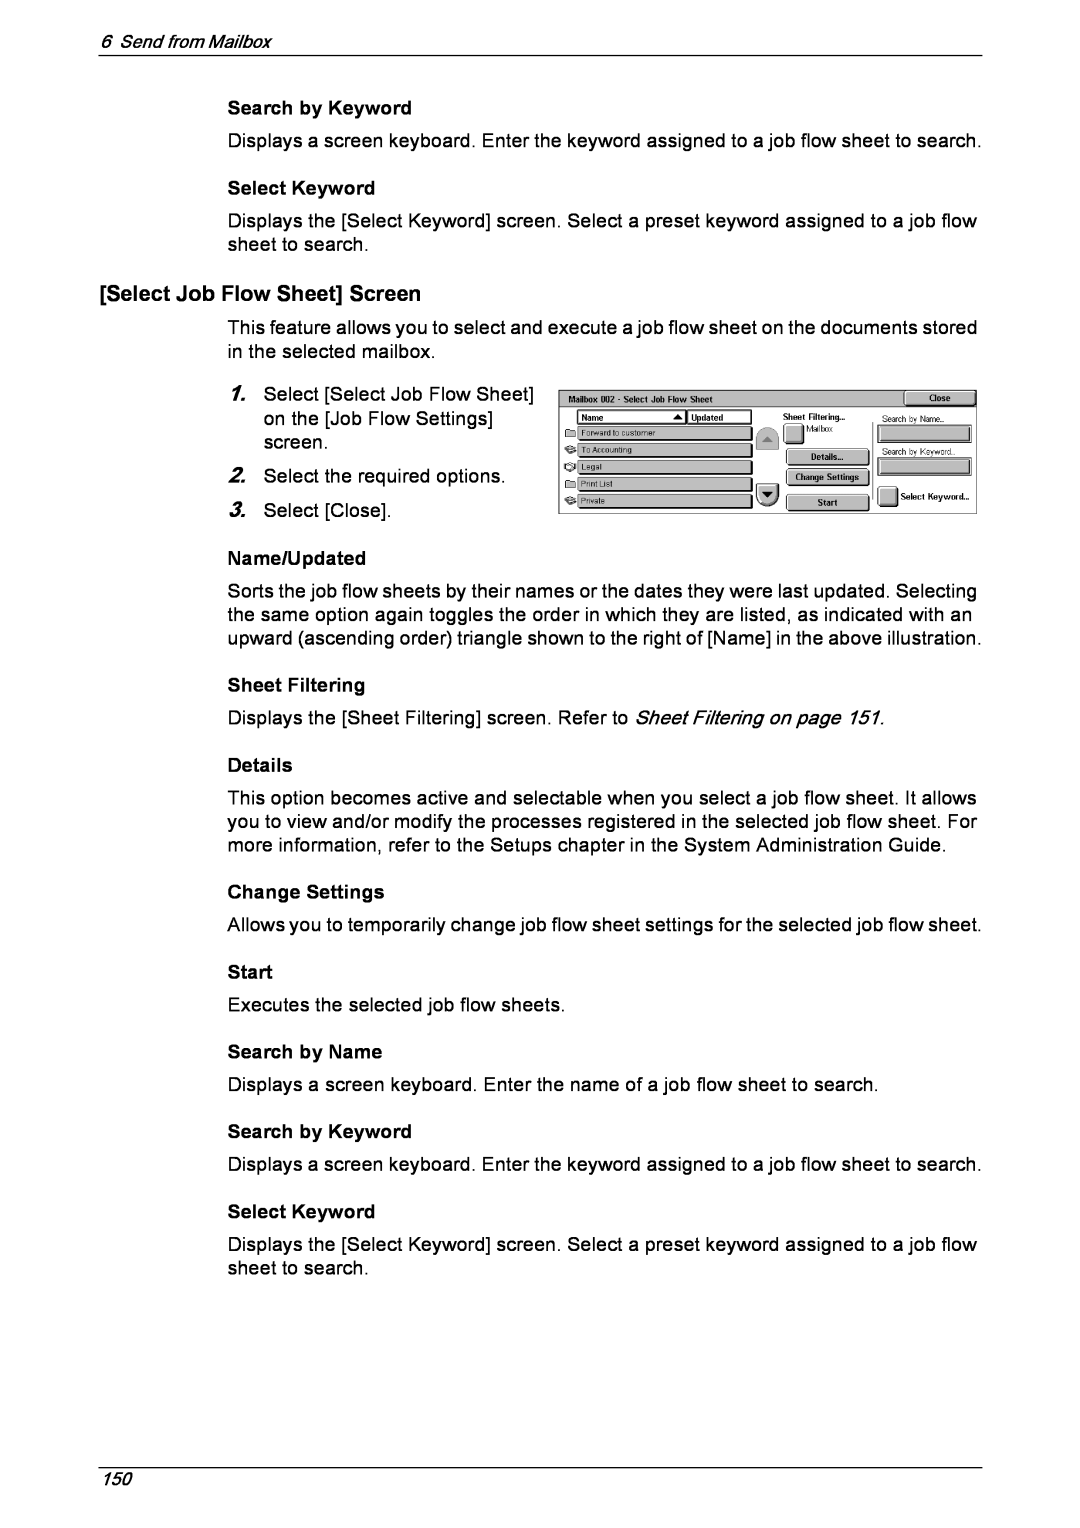 Xerox 5230 Select Job Flow Sheet Screen, Search by Keyword, Select Keyword, Name/Updated, Sheet Filtering, Details, Start 